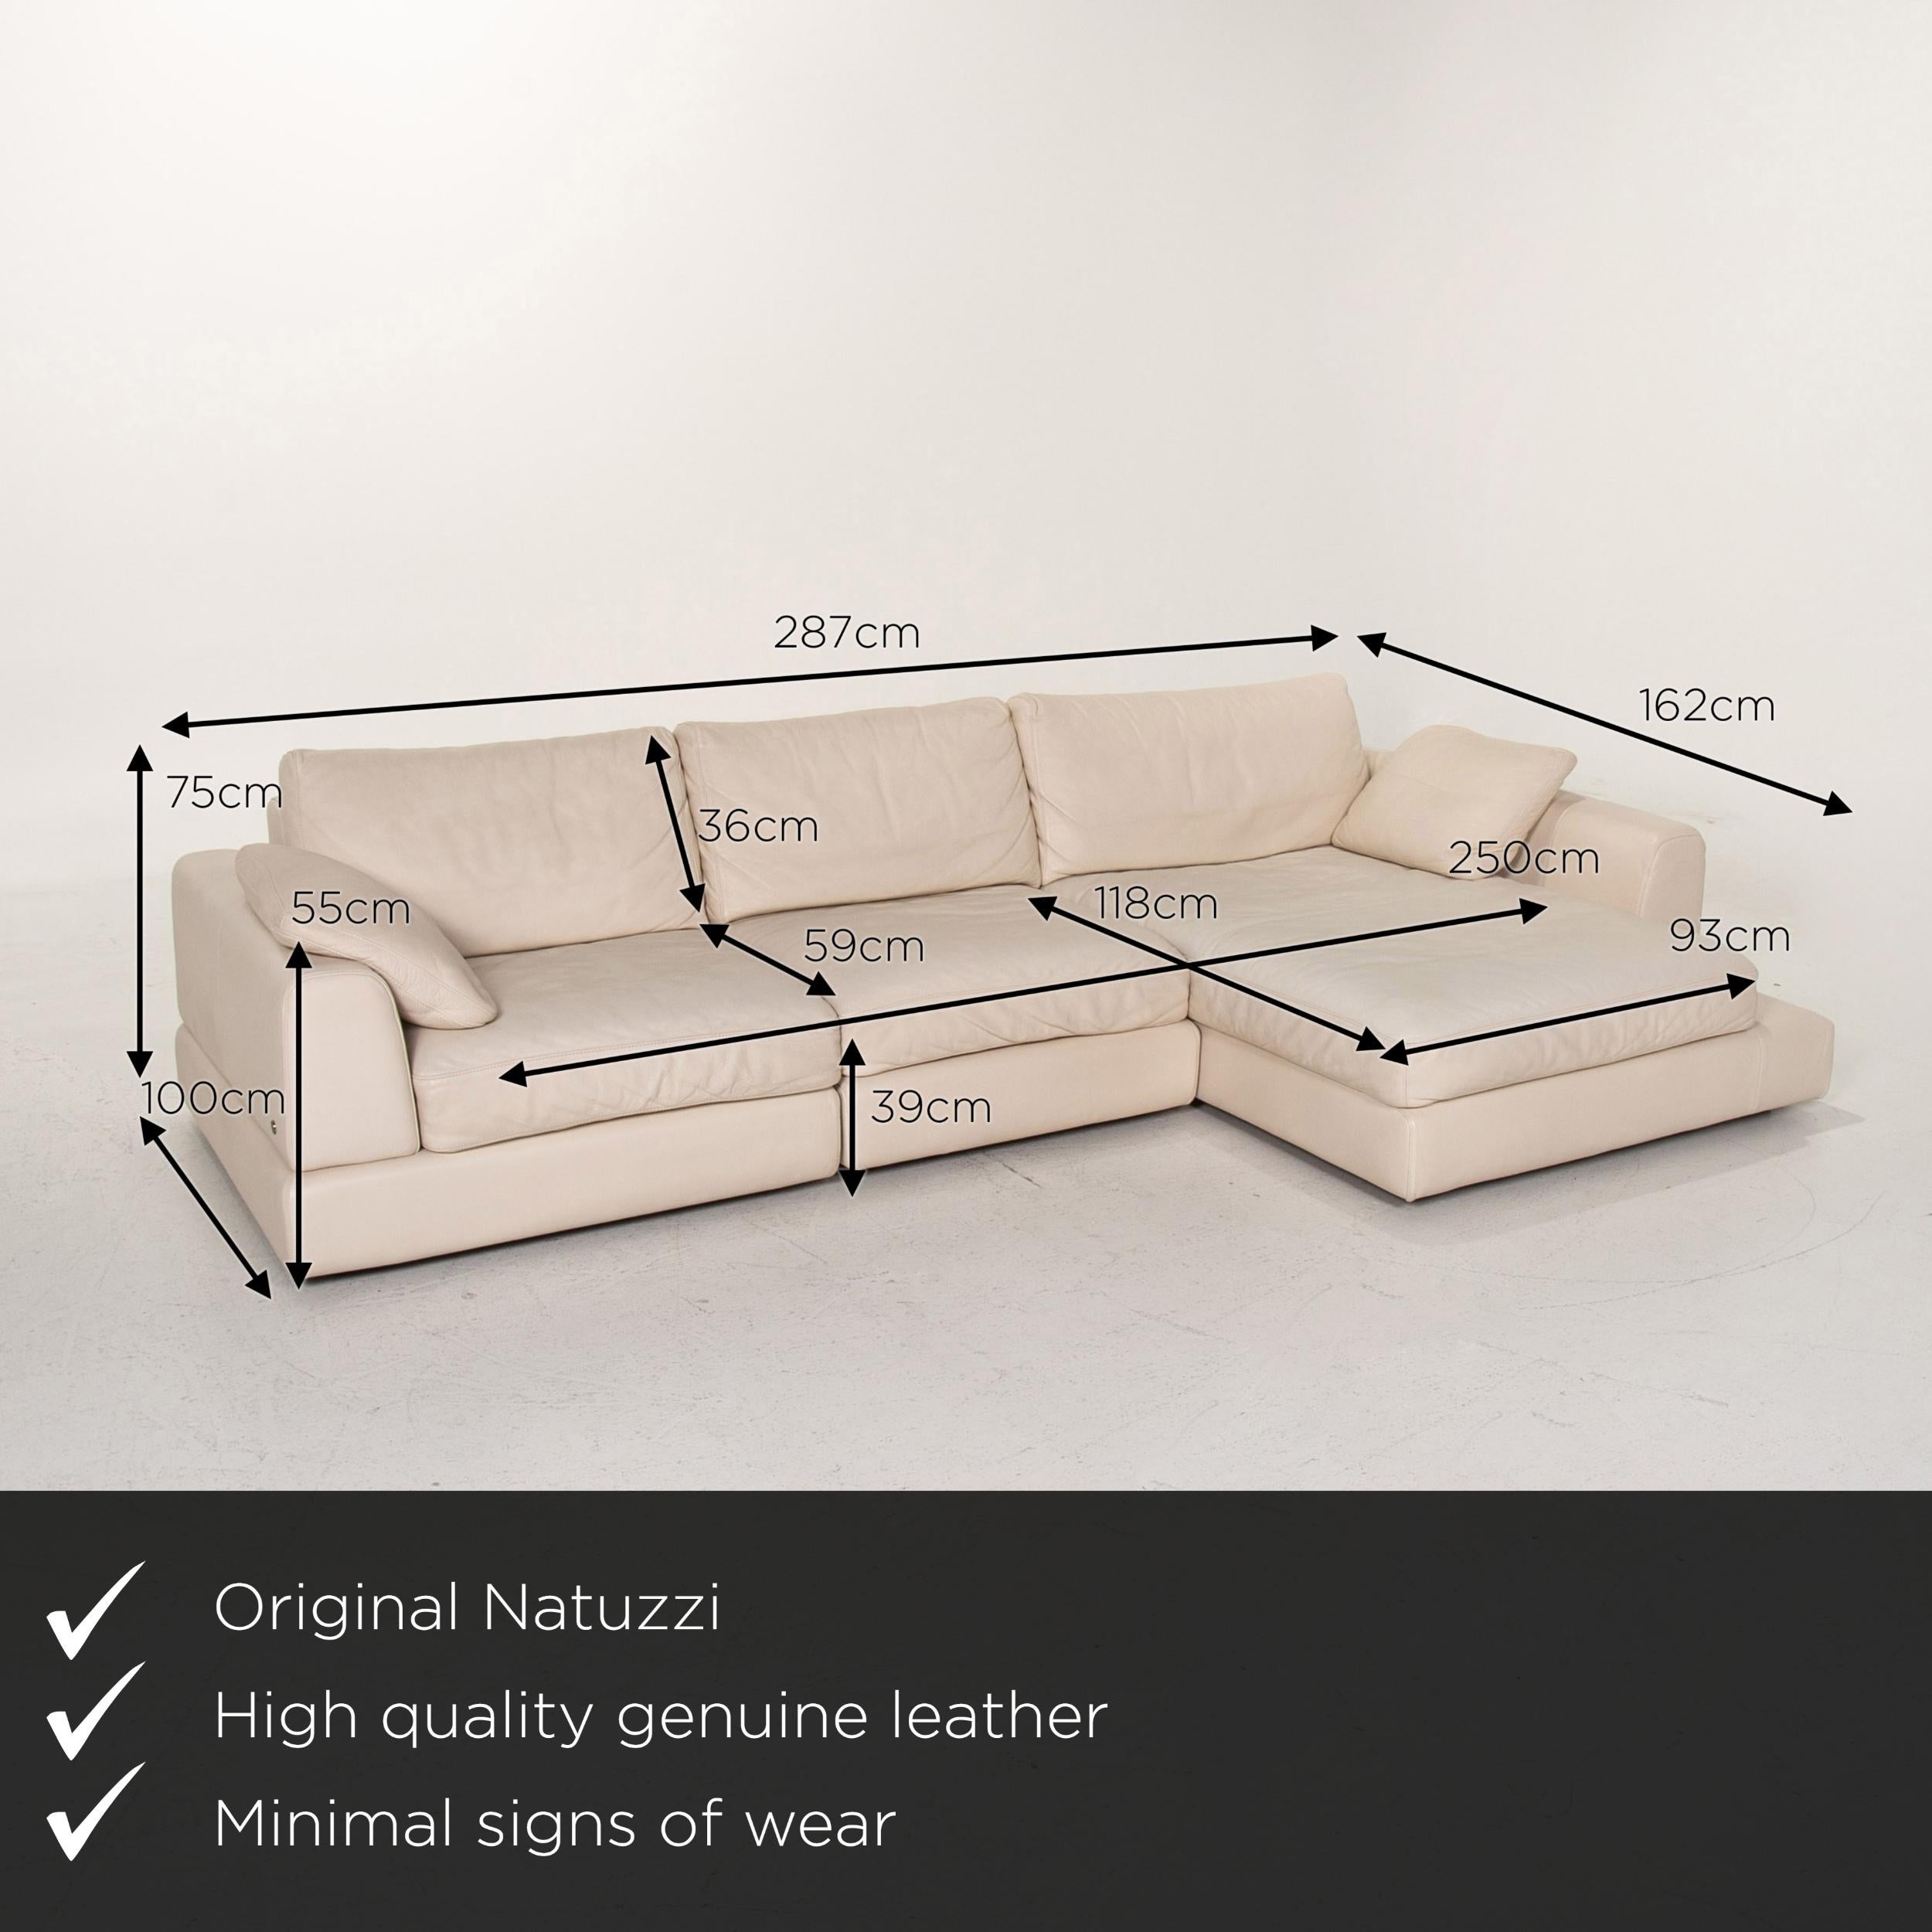 We present to you a Natuzzi Diagonal 2375 leather corner sofa cream sofa couch.
   
 

 Product measurements in centimeters:
 

Depth 100
Width 287
Height 75
Seat height 39
Rest height 55
Seat depth 59
Seat width 250
Back height 36.